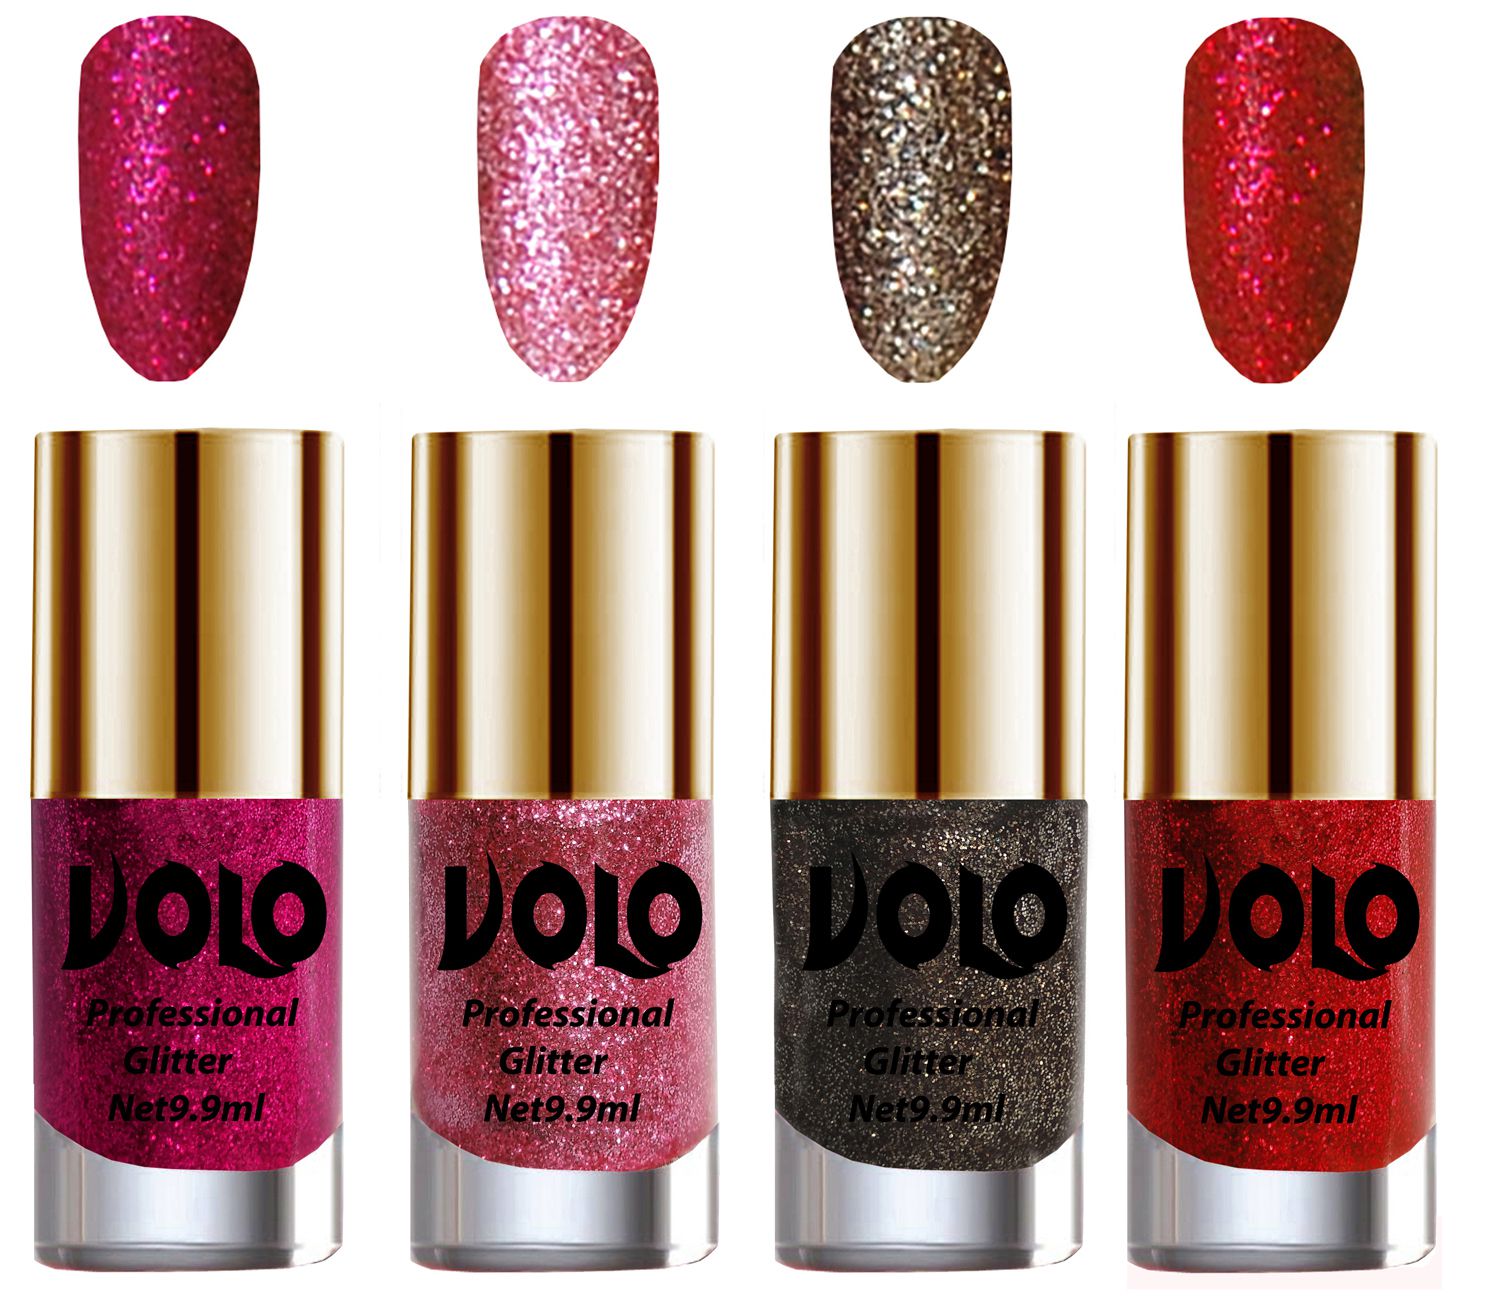     			VOLO Professionally Used Glitter Shine Nail Polish Magenta,Pink,Grey Red Pack of 4 39 mL